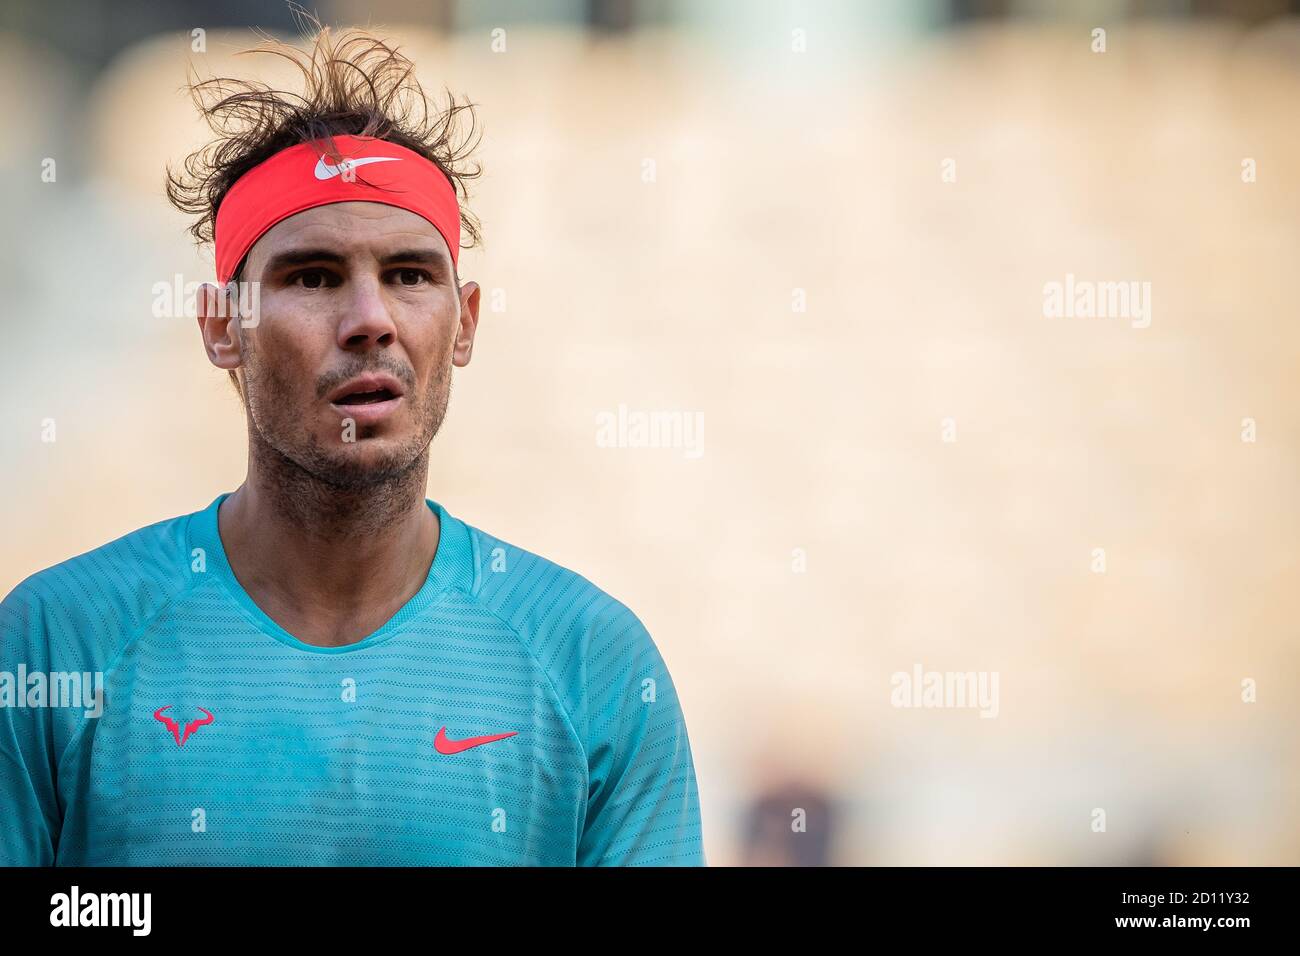 Paris, France. 4th Oct, 2020. Rafael Nadal reacts during the men's singles 4th round match between Rafael Nadal of Spain and Sebastian Korda of the United States at the French Open tennis tournament 2020 at Roland Garros in Paris, France, Oct. 4, 2020. Credit: Aurelien Morissard/Xinhua/Alamy Live News Stock Photo